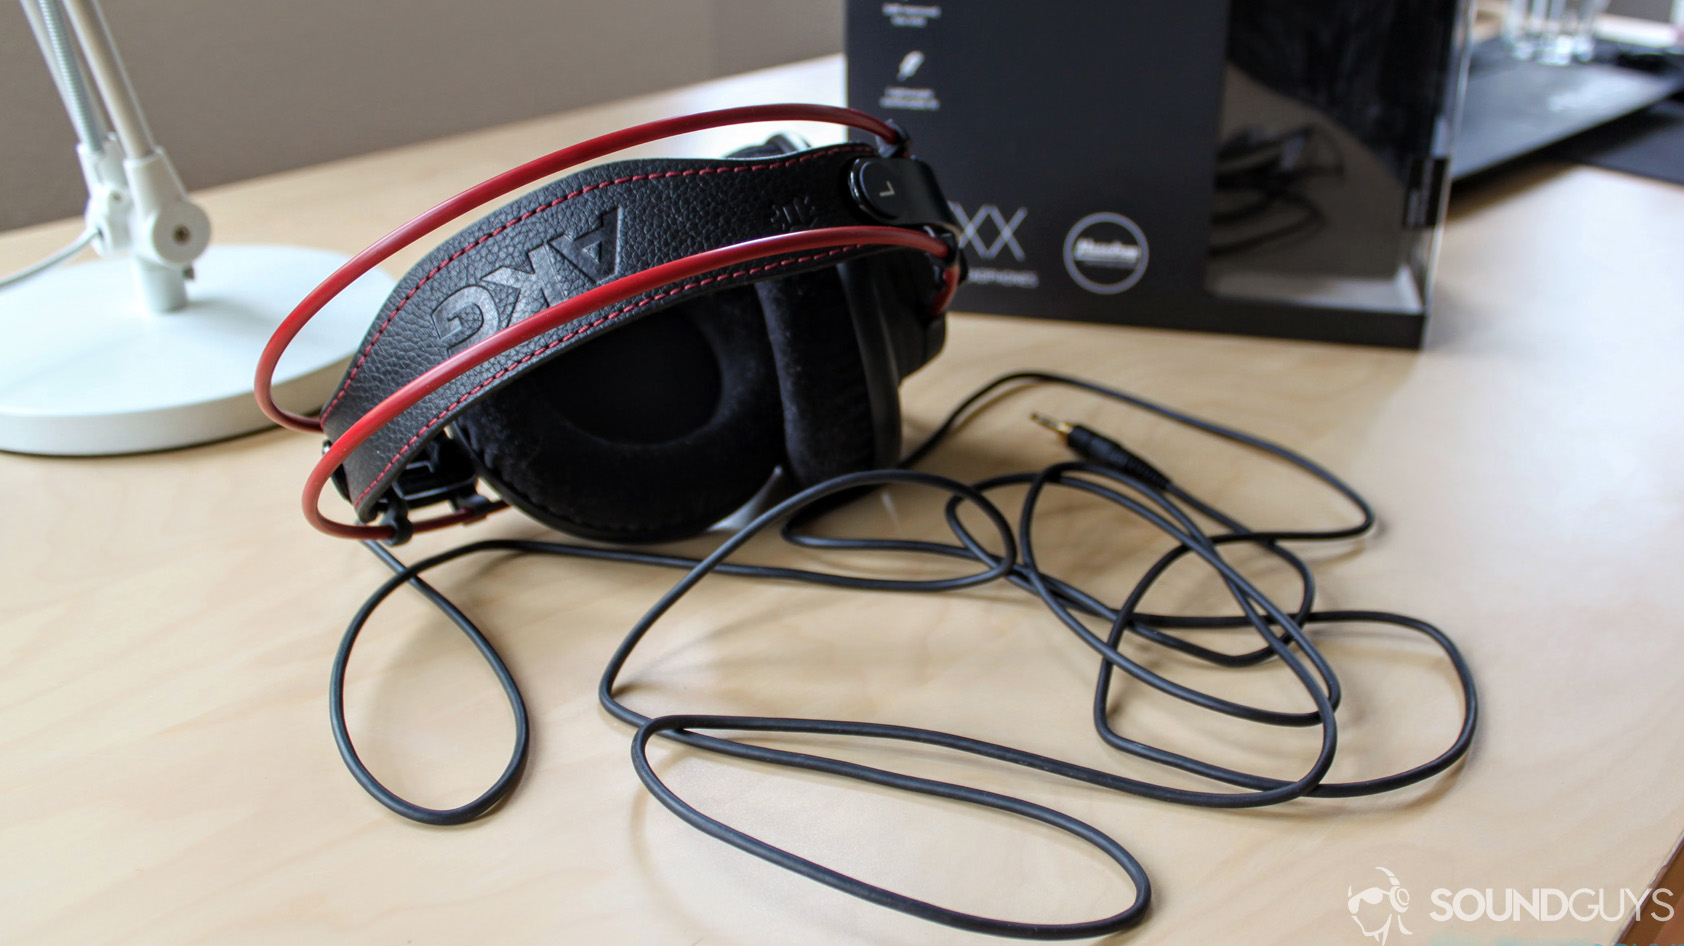 A photo of the AKG K7XX on a desk with red accents and cable visible.